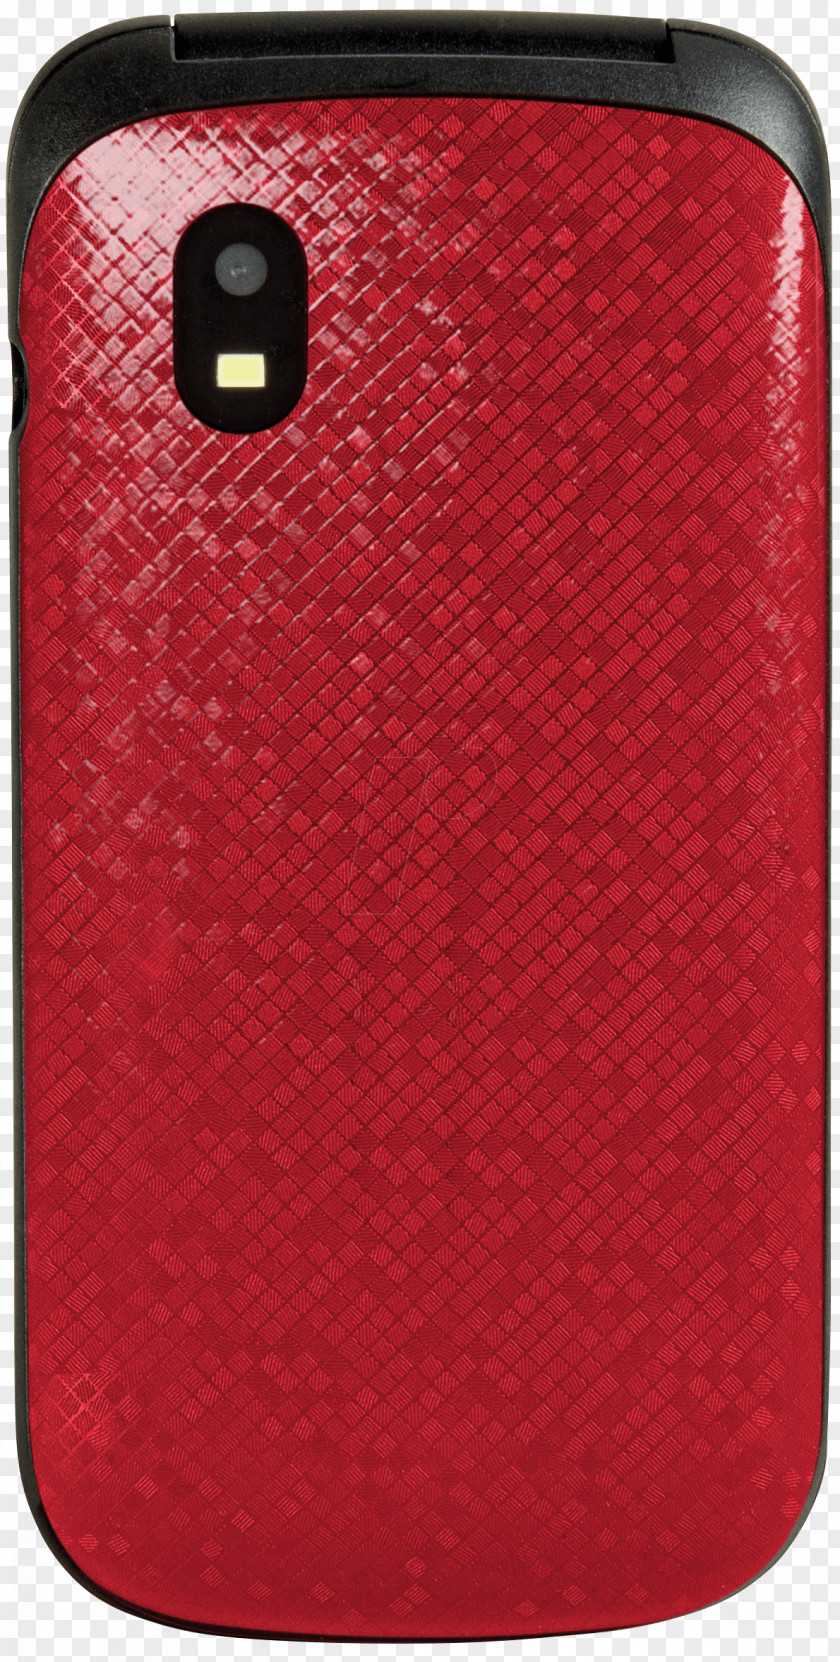 Tone Rot Mobile Phone Accessories Swisstone SC 330 Flip Top PNG